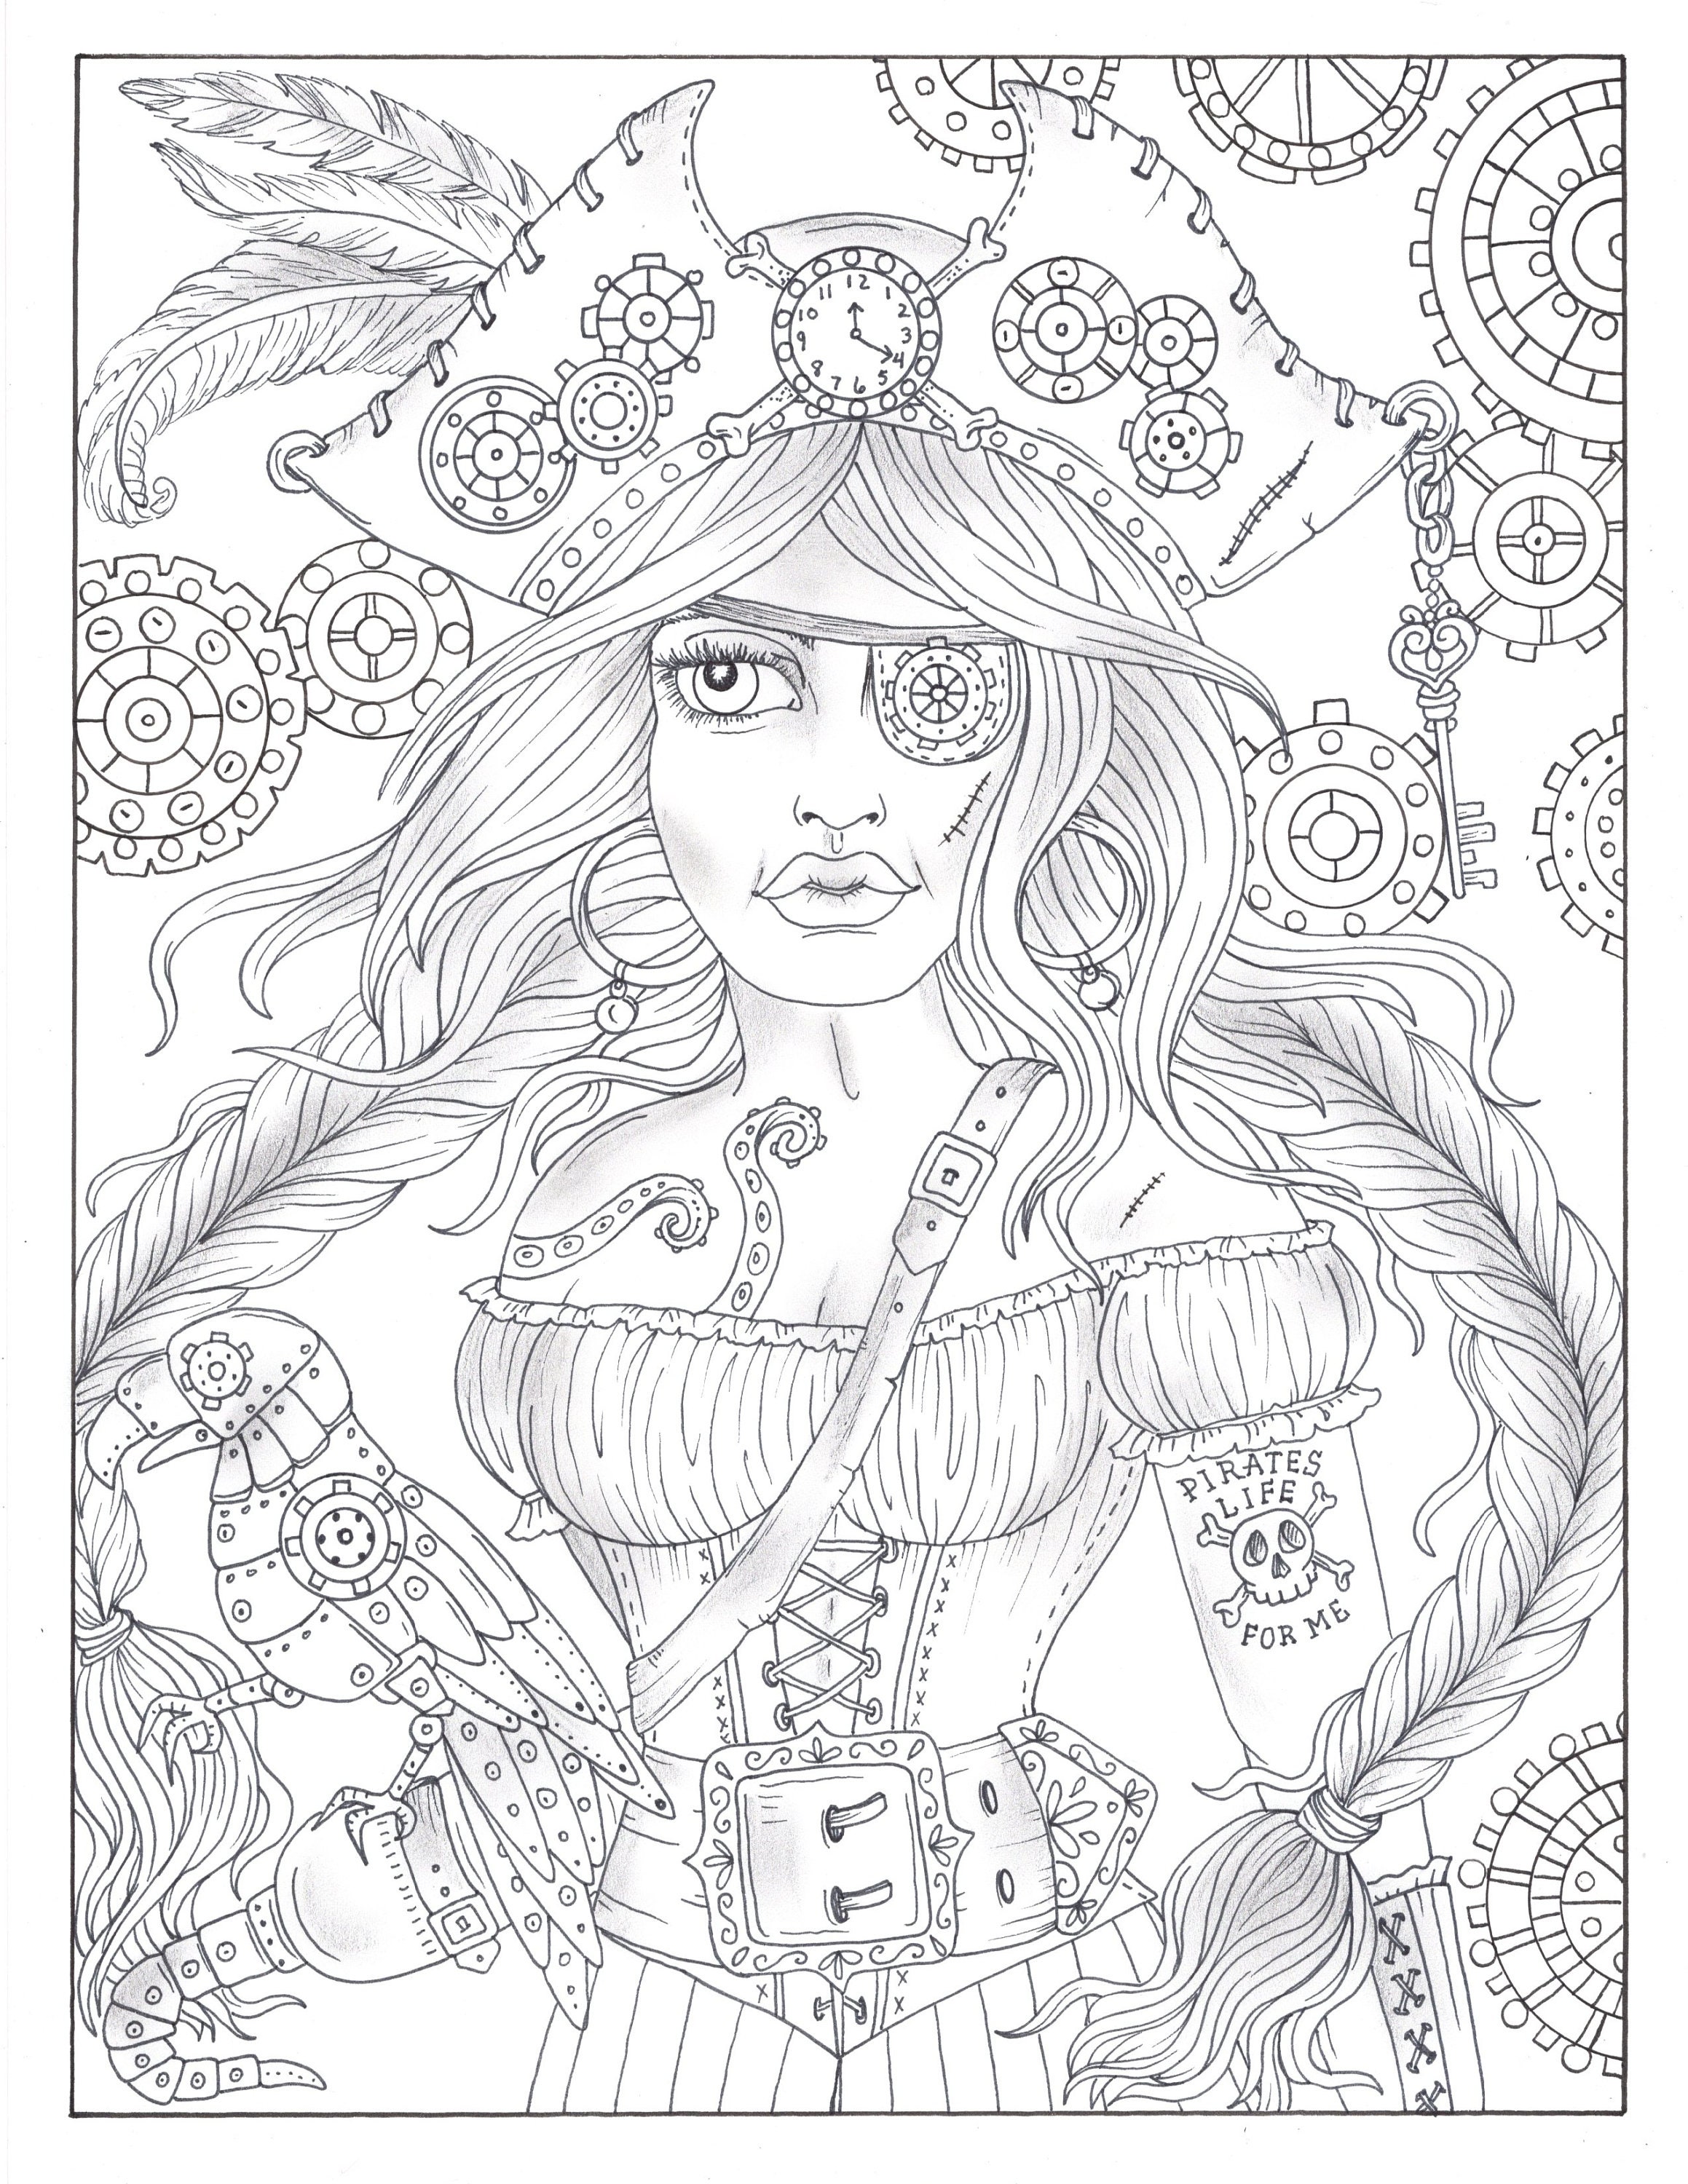 Steampunk pirate girl coloring page instant download adult coloring page colouring color digital digi